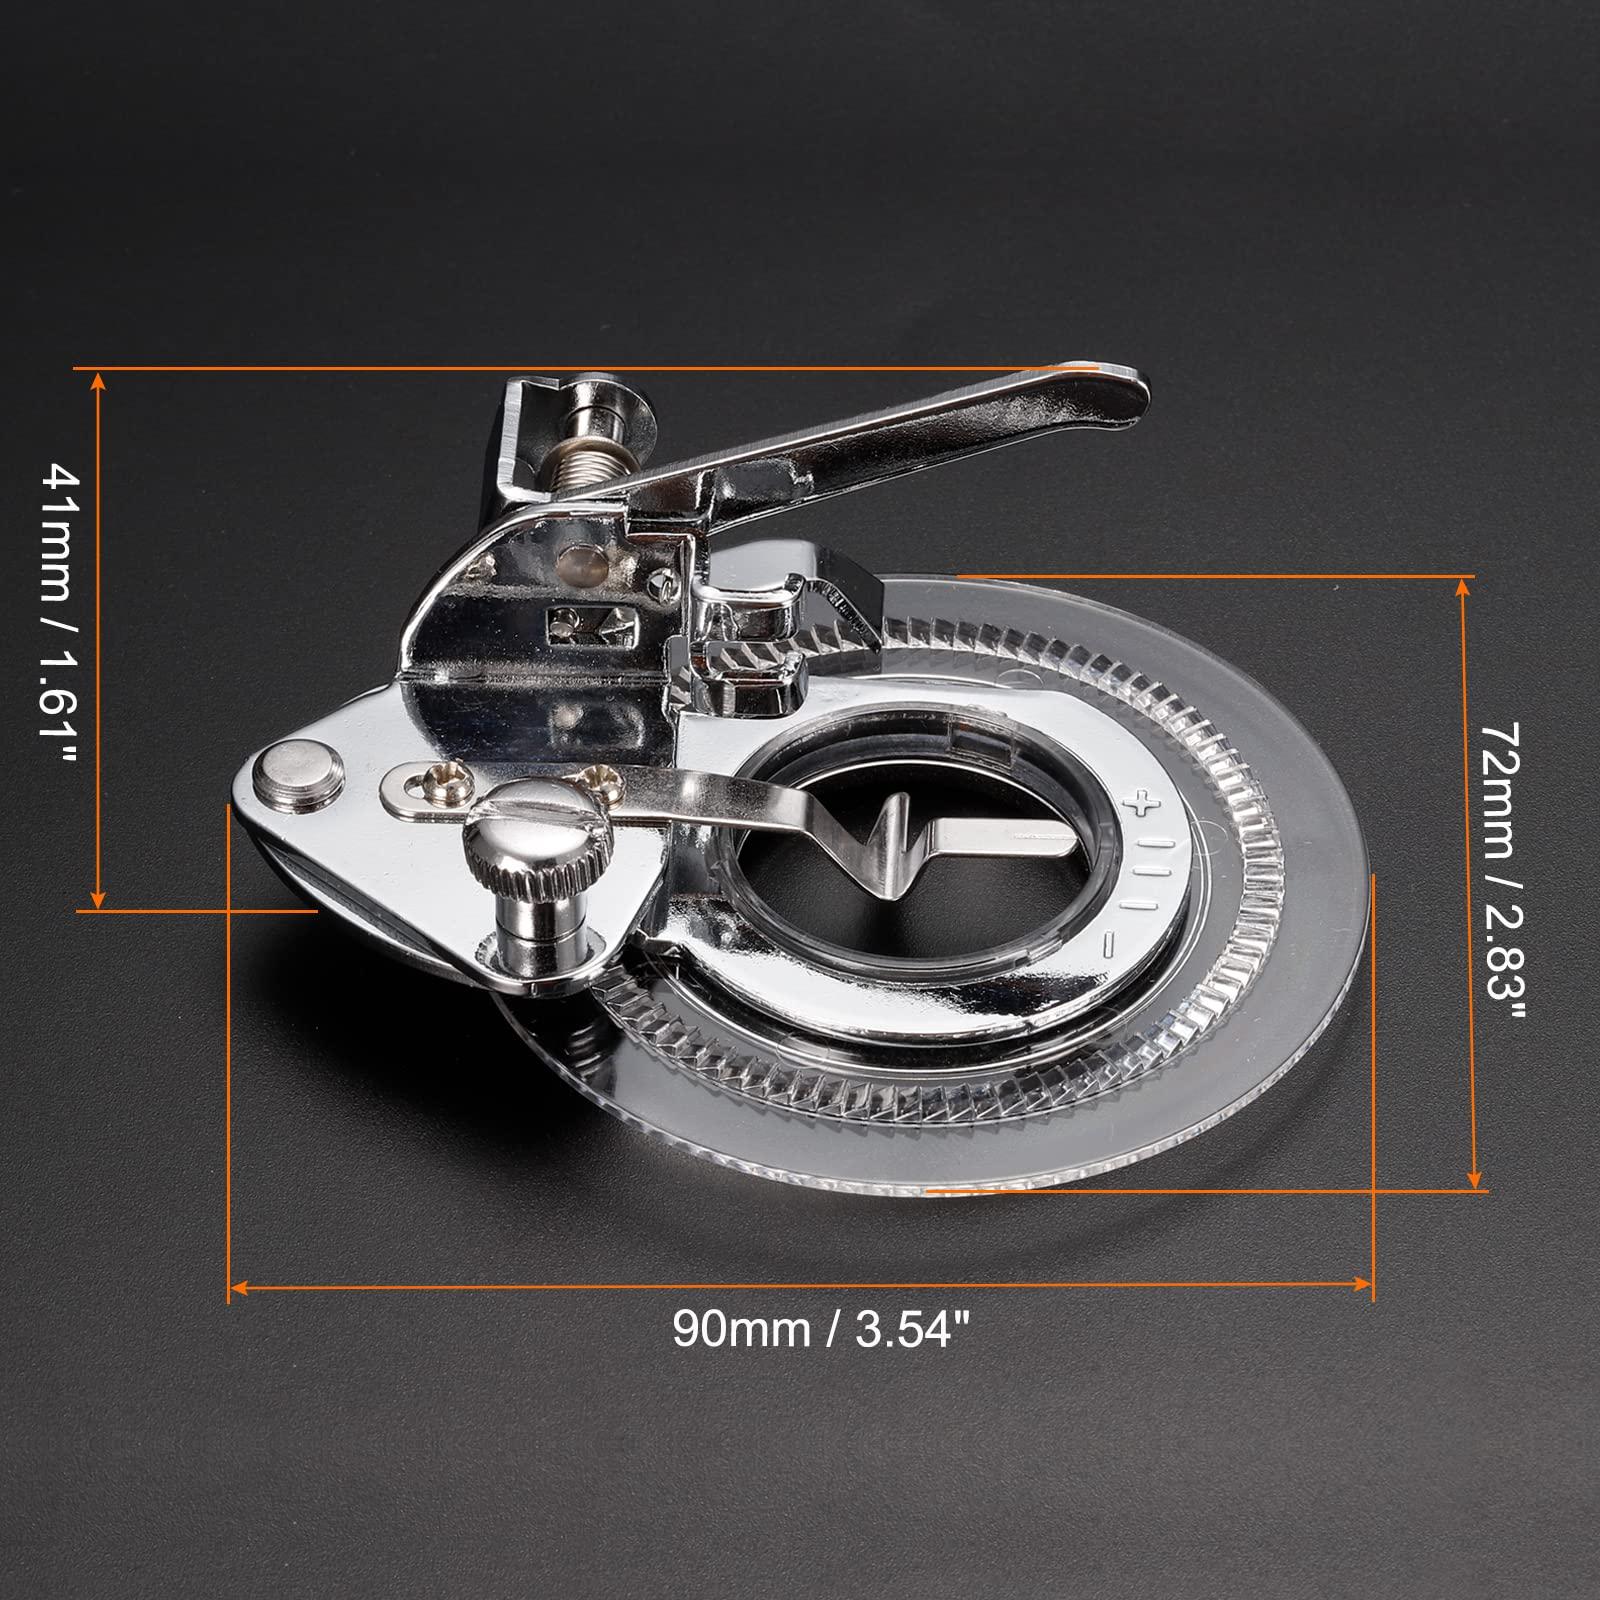 sourcing map Practical Circular Embroidery Round Foot Daisy Flower Stitch Disc Pattern Sewing Machine Foot, Sewing Machine Replace Accessories, 2Pcs 1